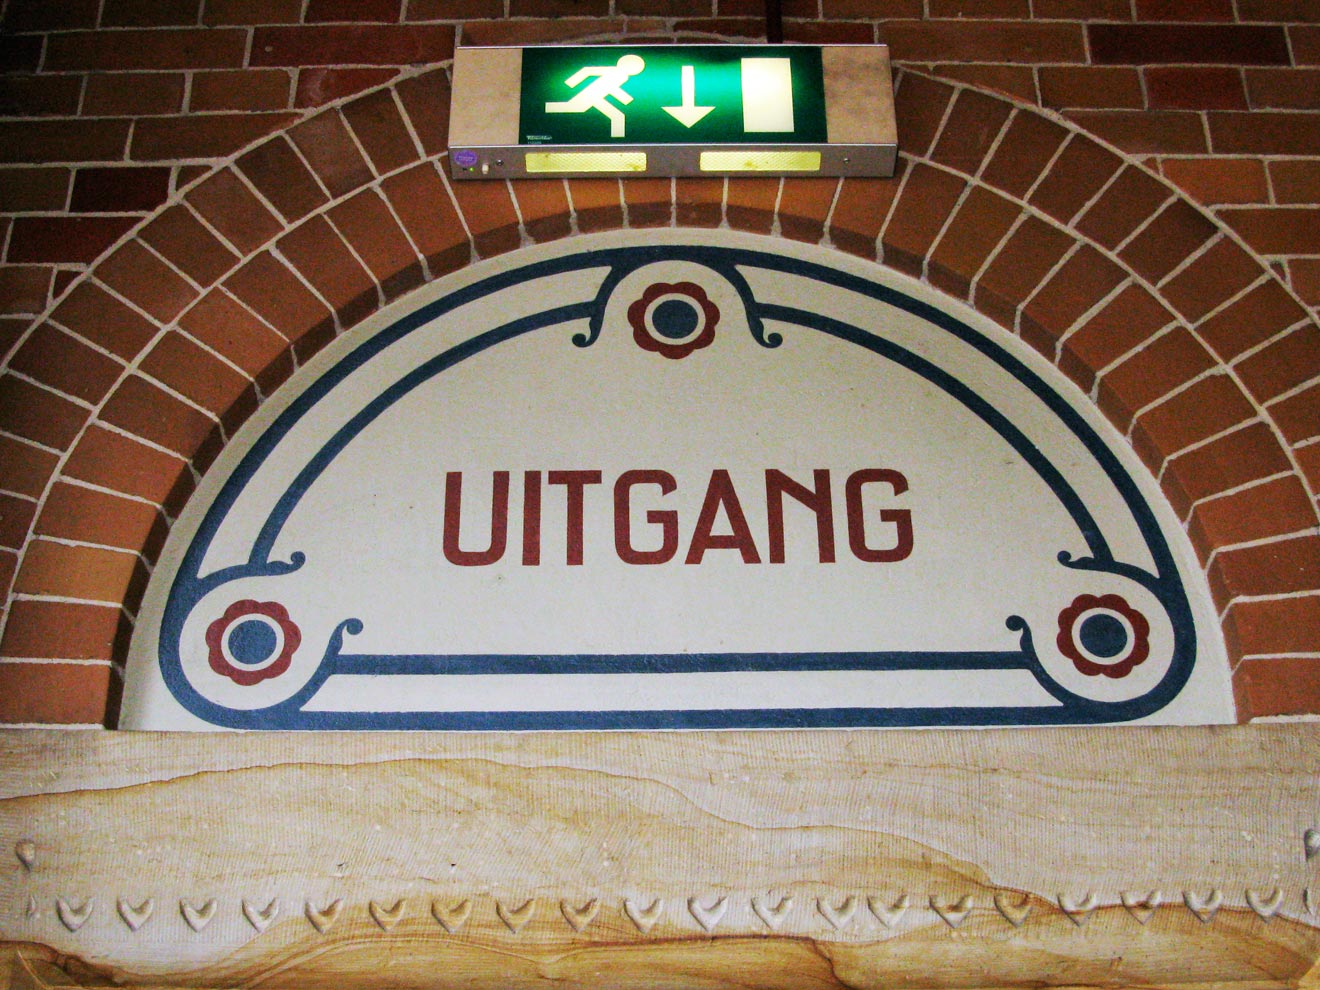 One example of the typical lettering above an exit in the Beurs van Berlage, showcasing Berlage’s signature style.